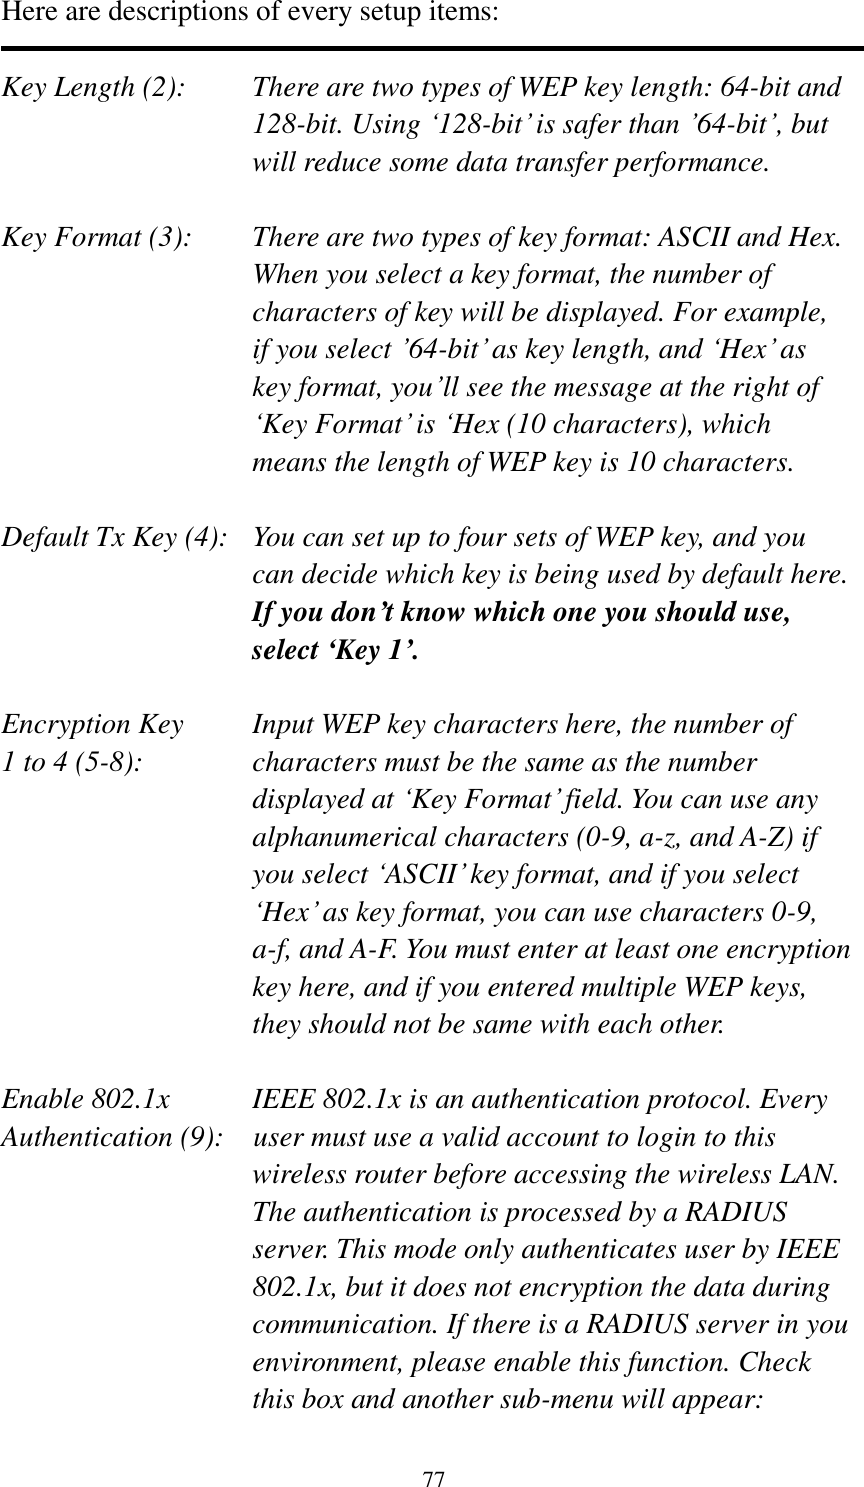 77 Here are descriptions of every setup items:  Key Length (2):    There are two types of WEP key length: 64-bit and 128-bit. Using „128-bit‟ is safer than ‟64-bit‟, but will reduce some data transfer performance.  Key Format (3):    There are two types of key format: ASCII and Hex. When you select a key format, the number of characters of key will be displayed. For example, if you select ‟64-bit‟ as key length, and „Hex‟ as key format, you‟ll see the message at the right of „Key Format‟ is „Hex (10 characters), which means the length of WEP key is 10 characters.  Default Tx Key (4):   You can set up to four sets of WEP key, and you can decide which key is being used by default here. If you don’t know which one you should use, select ‘Key 1’.  Encryption Key     Input WEP key characters here, the number of 1 to 4 (5-8):    characters must be the same as the number displayed at „Key Format‟ field. You can use any alphanumerical characters (0-9, a-z, and A-Z) if you select „ASCII‟ key format, and if you select „Hex‟ as key format, you can use characters 0-9, a-f, and A-F. You must enter at least one encryption key here, and if you entered multiple WEP keys, they should not be same with each other.  Enable 802.1x  IEEE 802.1x is an authentication protocol. Every   Authentication (9):  user must use a valid account to login to this wireless router before accessing the wireless LAN. The authentication is processed by a RADIUS server. This mode only authenticates user by IEEE 802.1x, but it does not encryption the data during communication. If there is a RADIUS server in you environment, please enable this function. Check this box and another sub-menu will appear: 